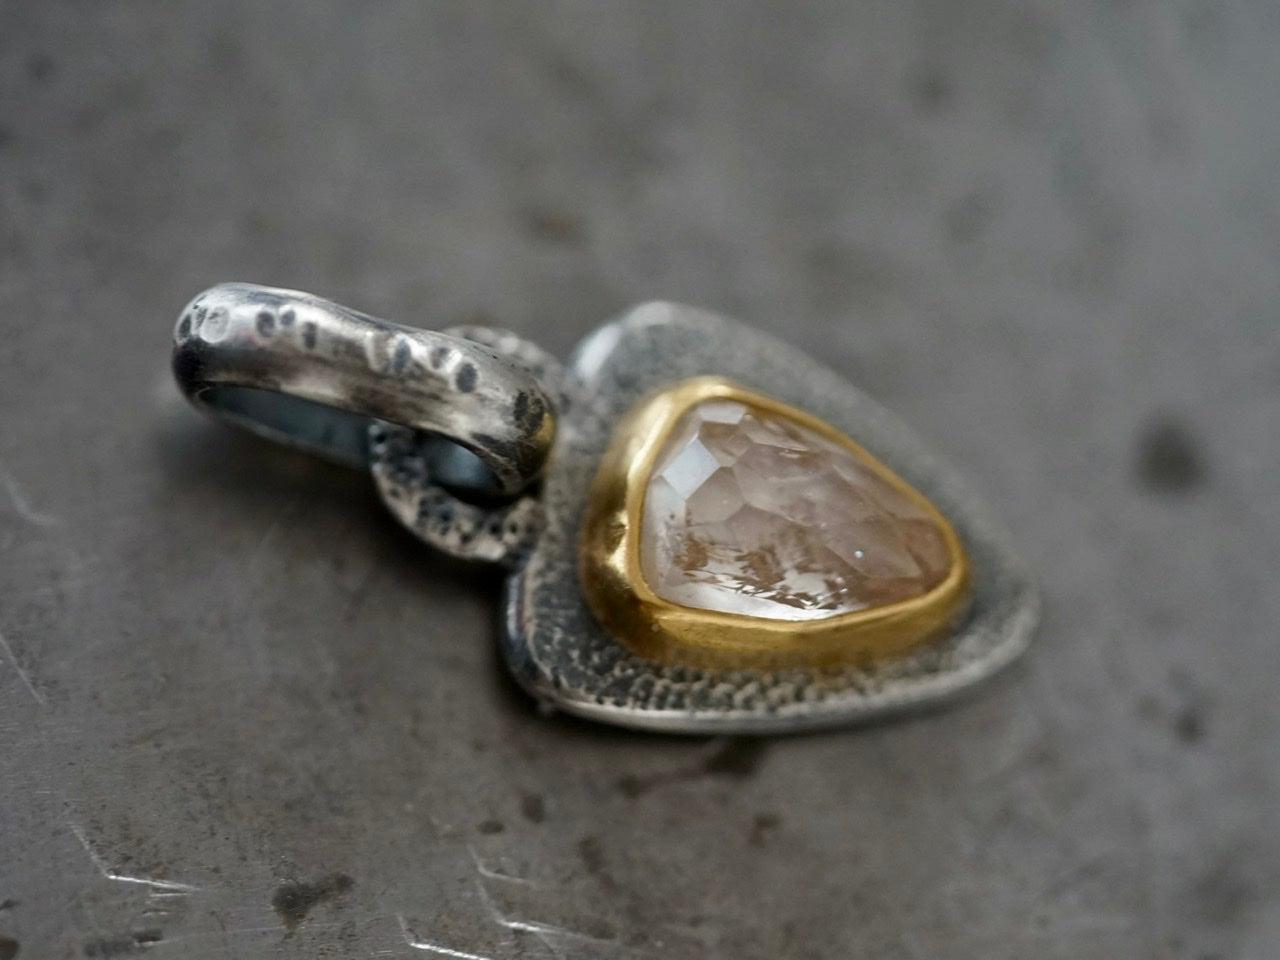 Topaz and 22k gold pendant